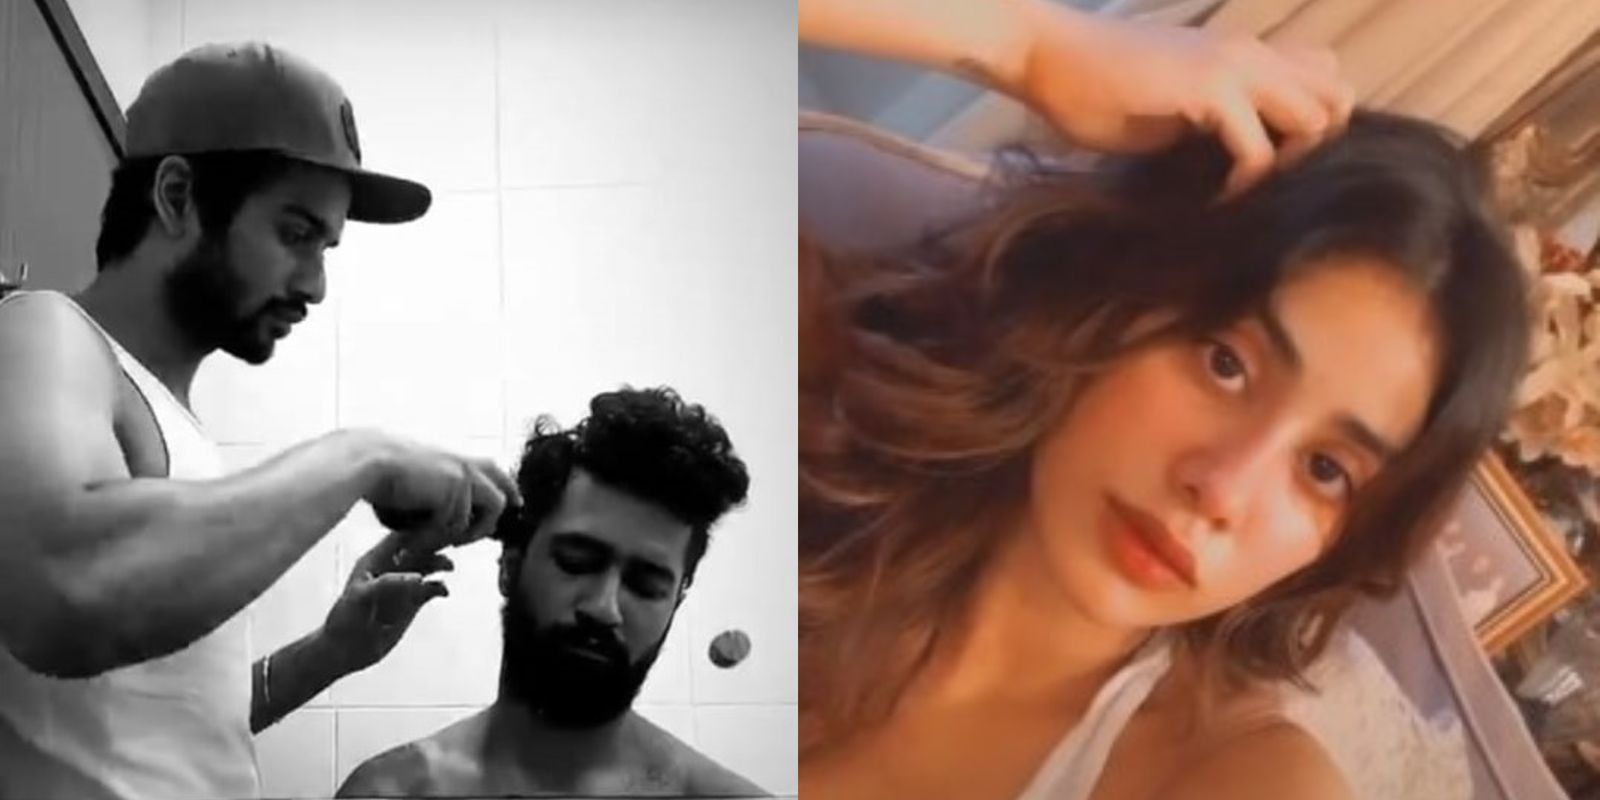 Vicky Kaushal Gets A Haircut From ‘Brother Turned Hairstylist’ Sunny; Janhvi Kapoor Enjoys A Midnight Baking Session